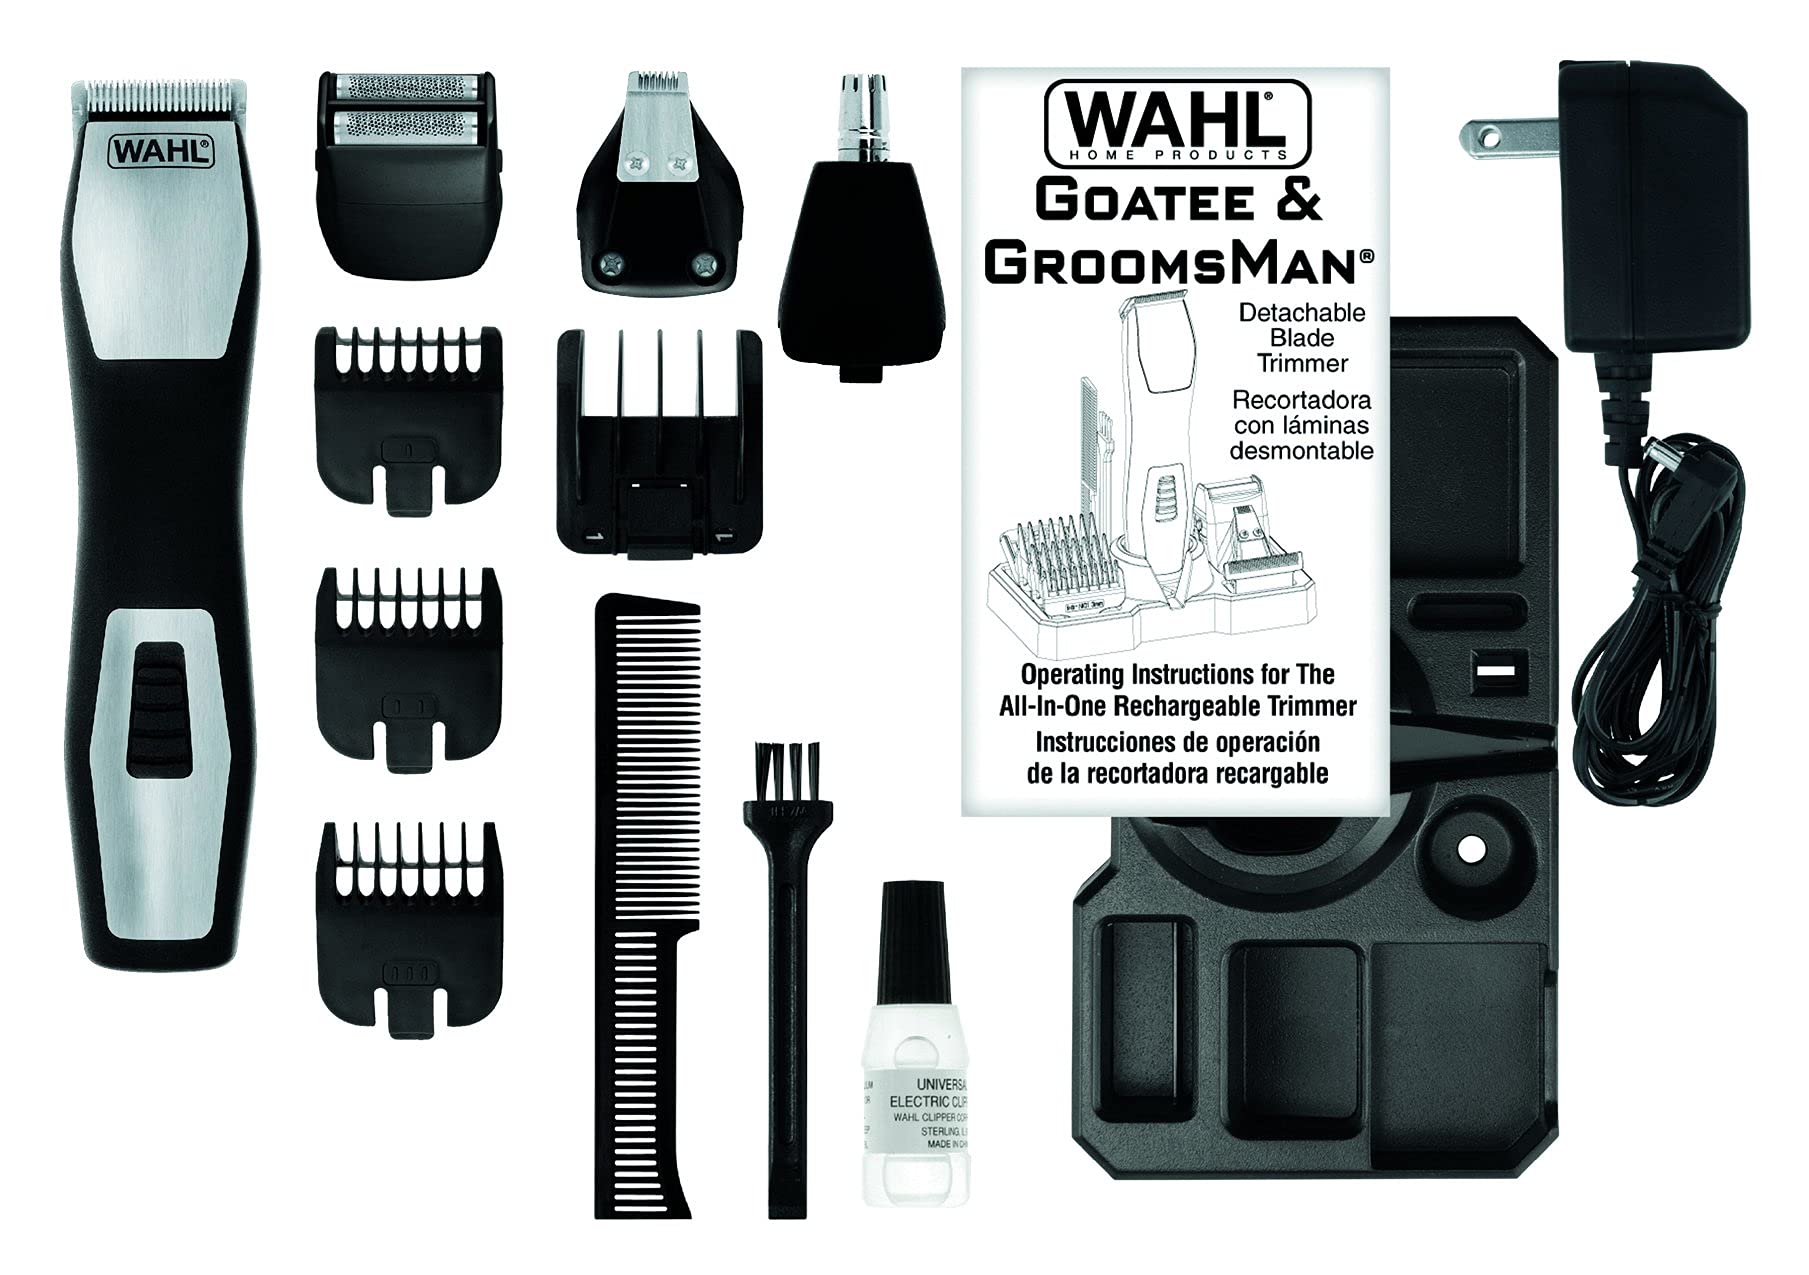 WAHL Groomsman Pro Rechargeable Grooming Kit, Multi grooming, Beard and Body Trimmer, 9 different cutting lengths beard trimmer for men, Black/Silver, 09855-1227 